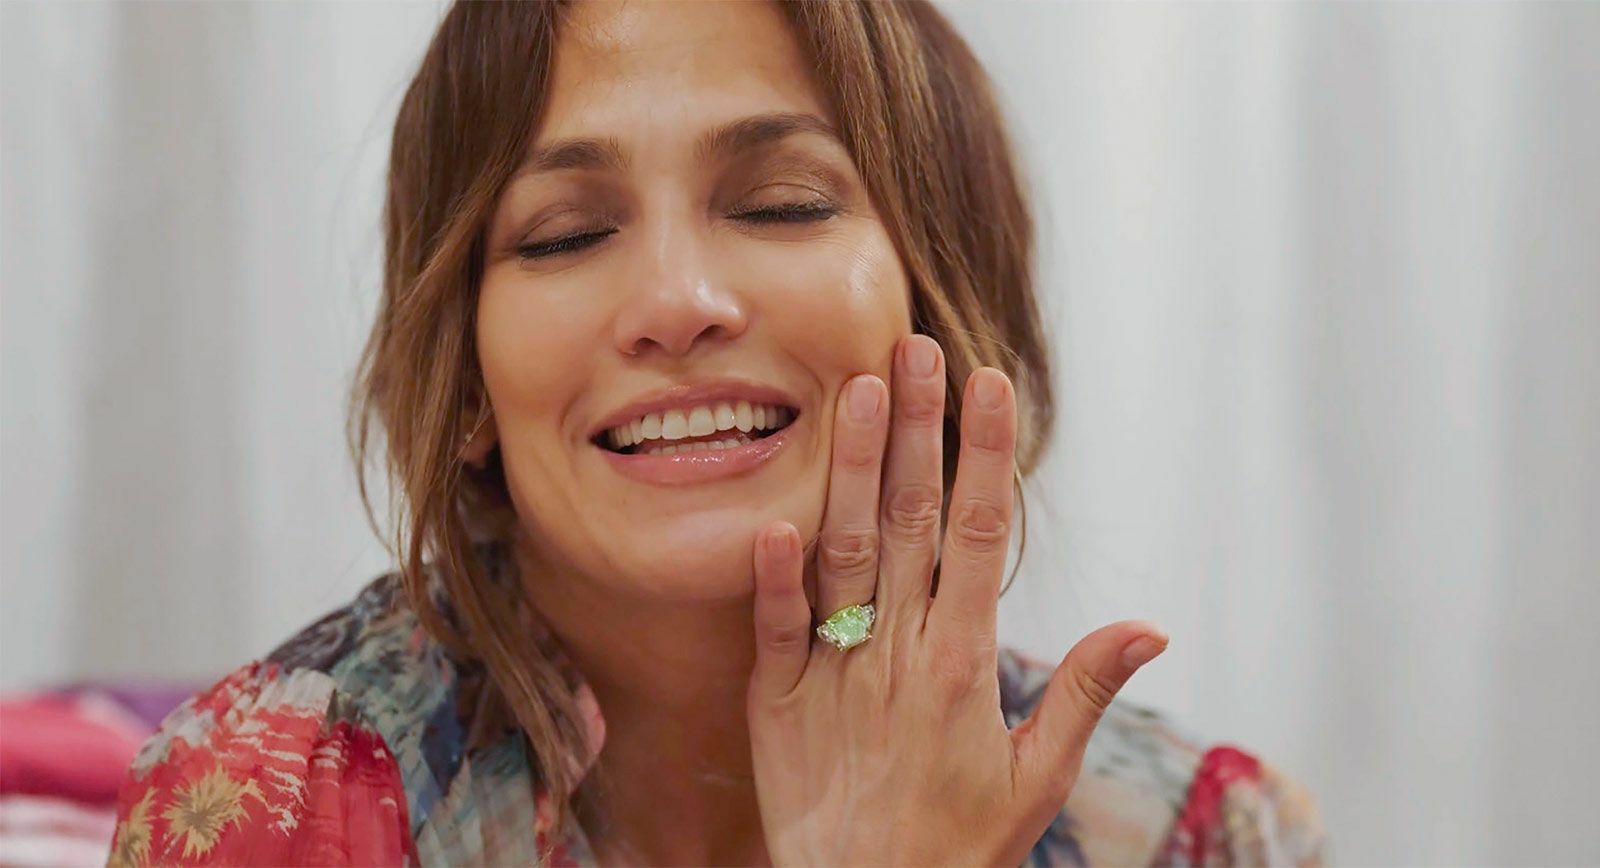 Jennifer Lopez showing off her green diamond engagement ring that Ben Affleck proposed with